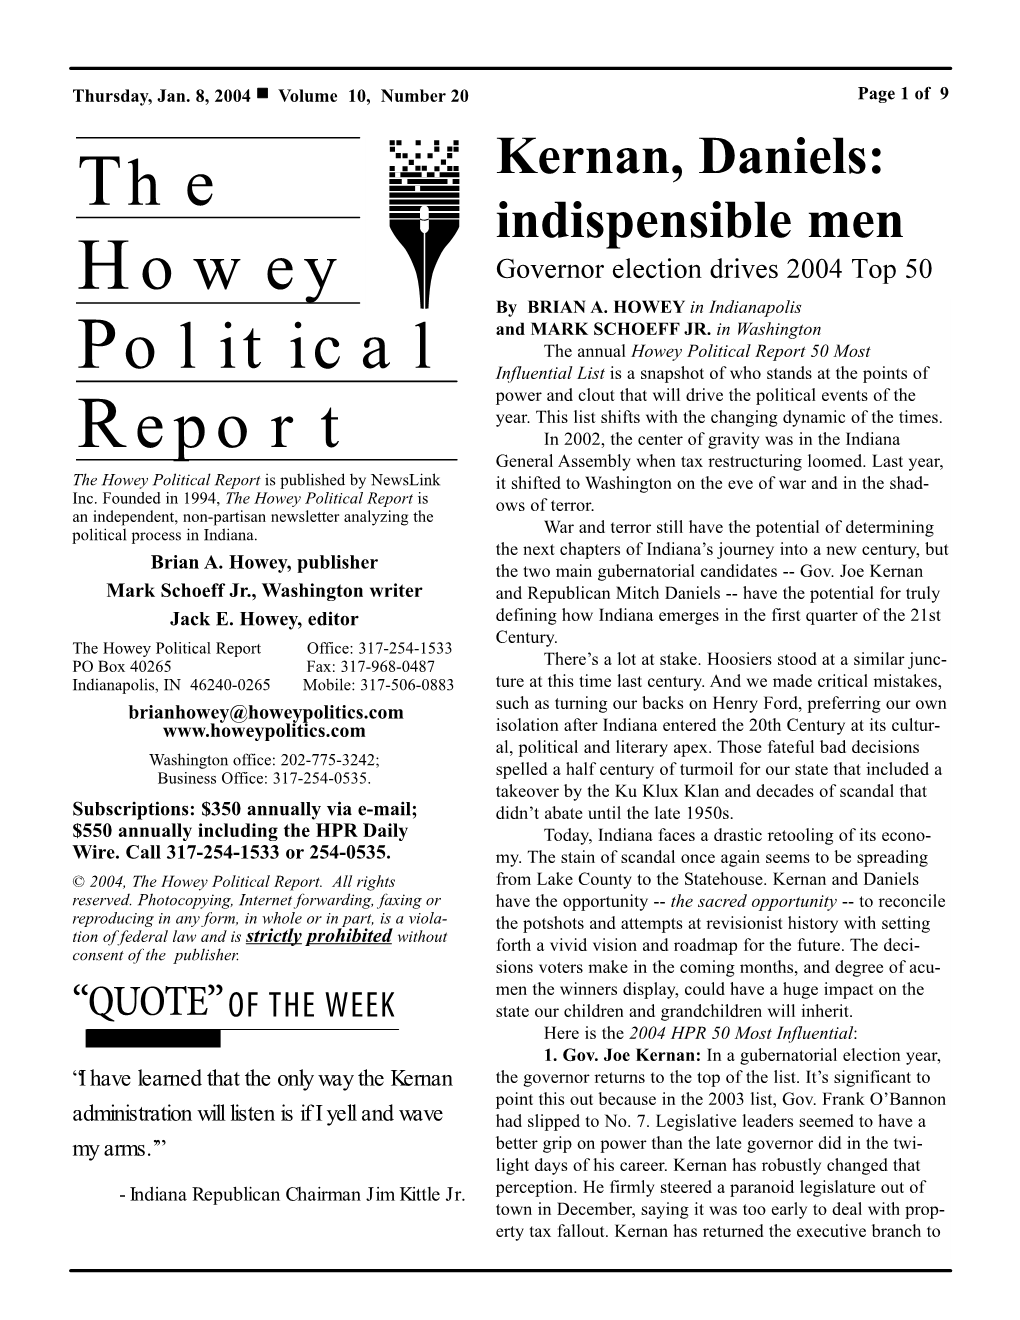 The Howey Political Report Is Published by Newslink It Shifted to Washington on the Eve of War and in the Shad- Inc